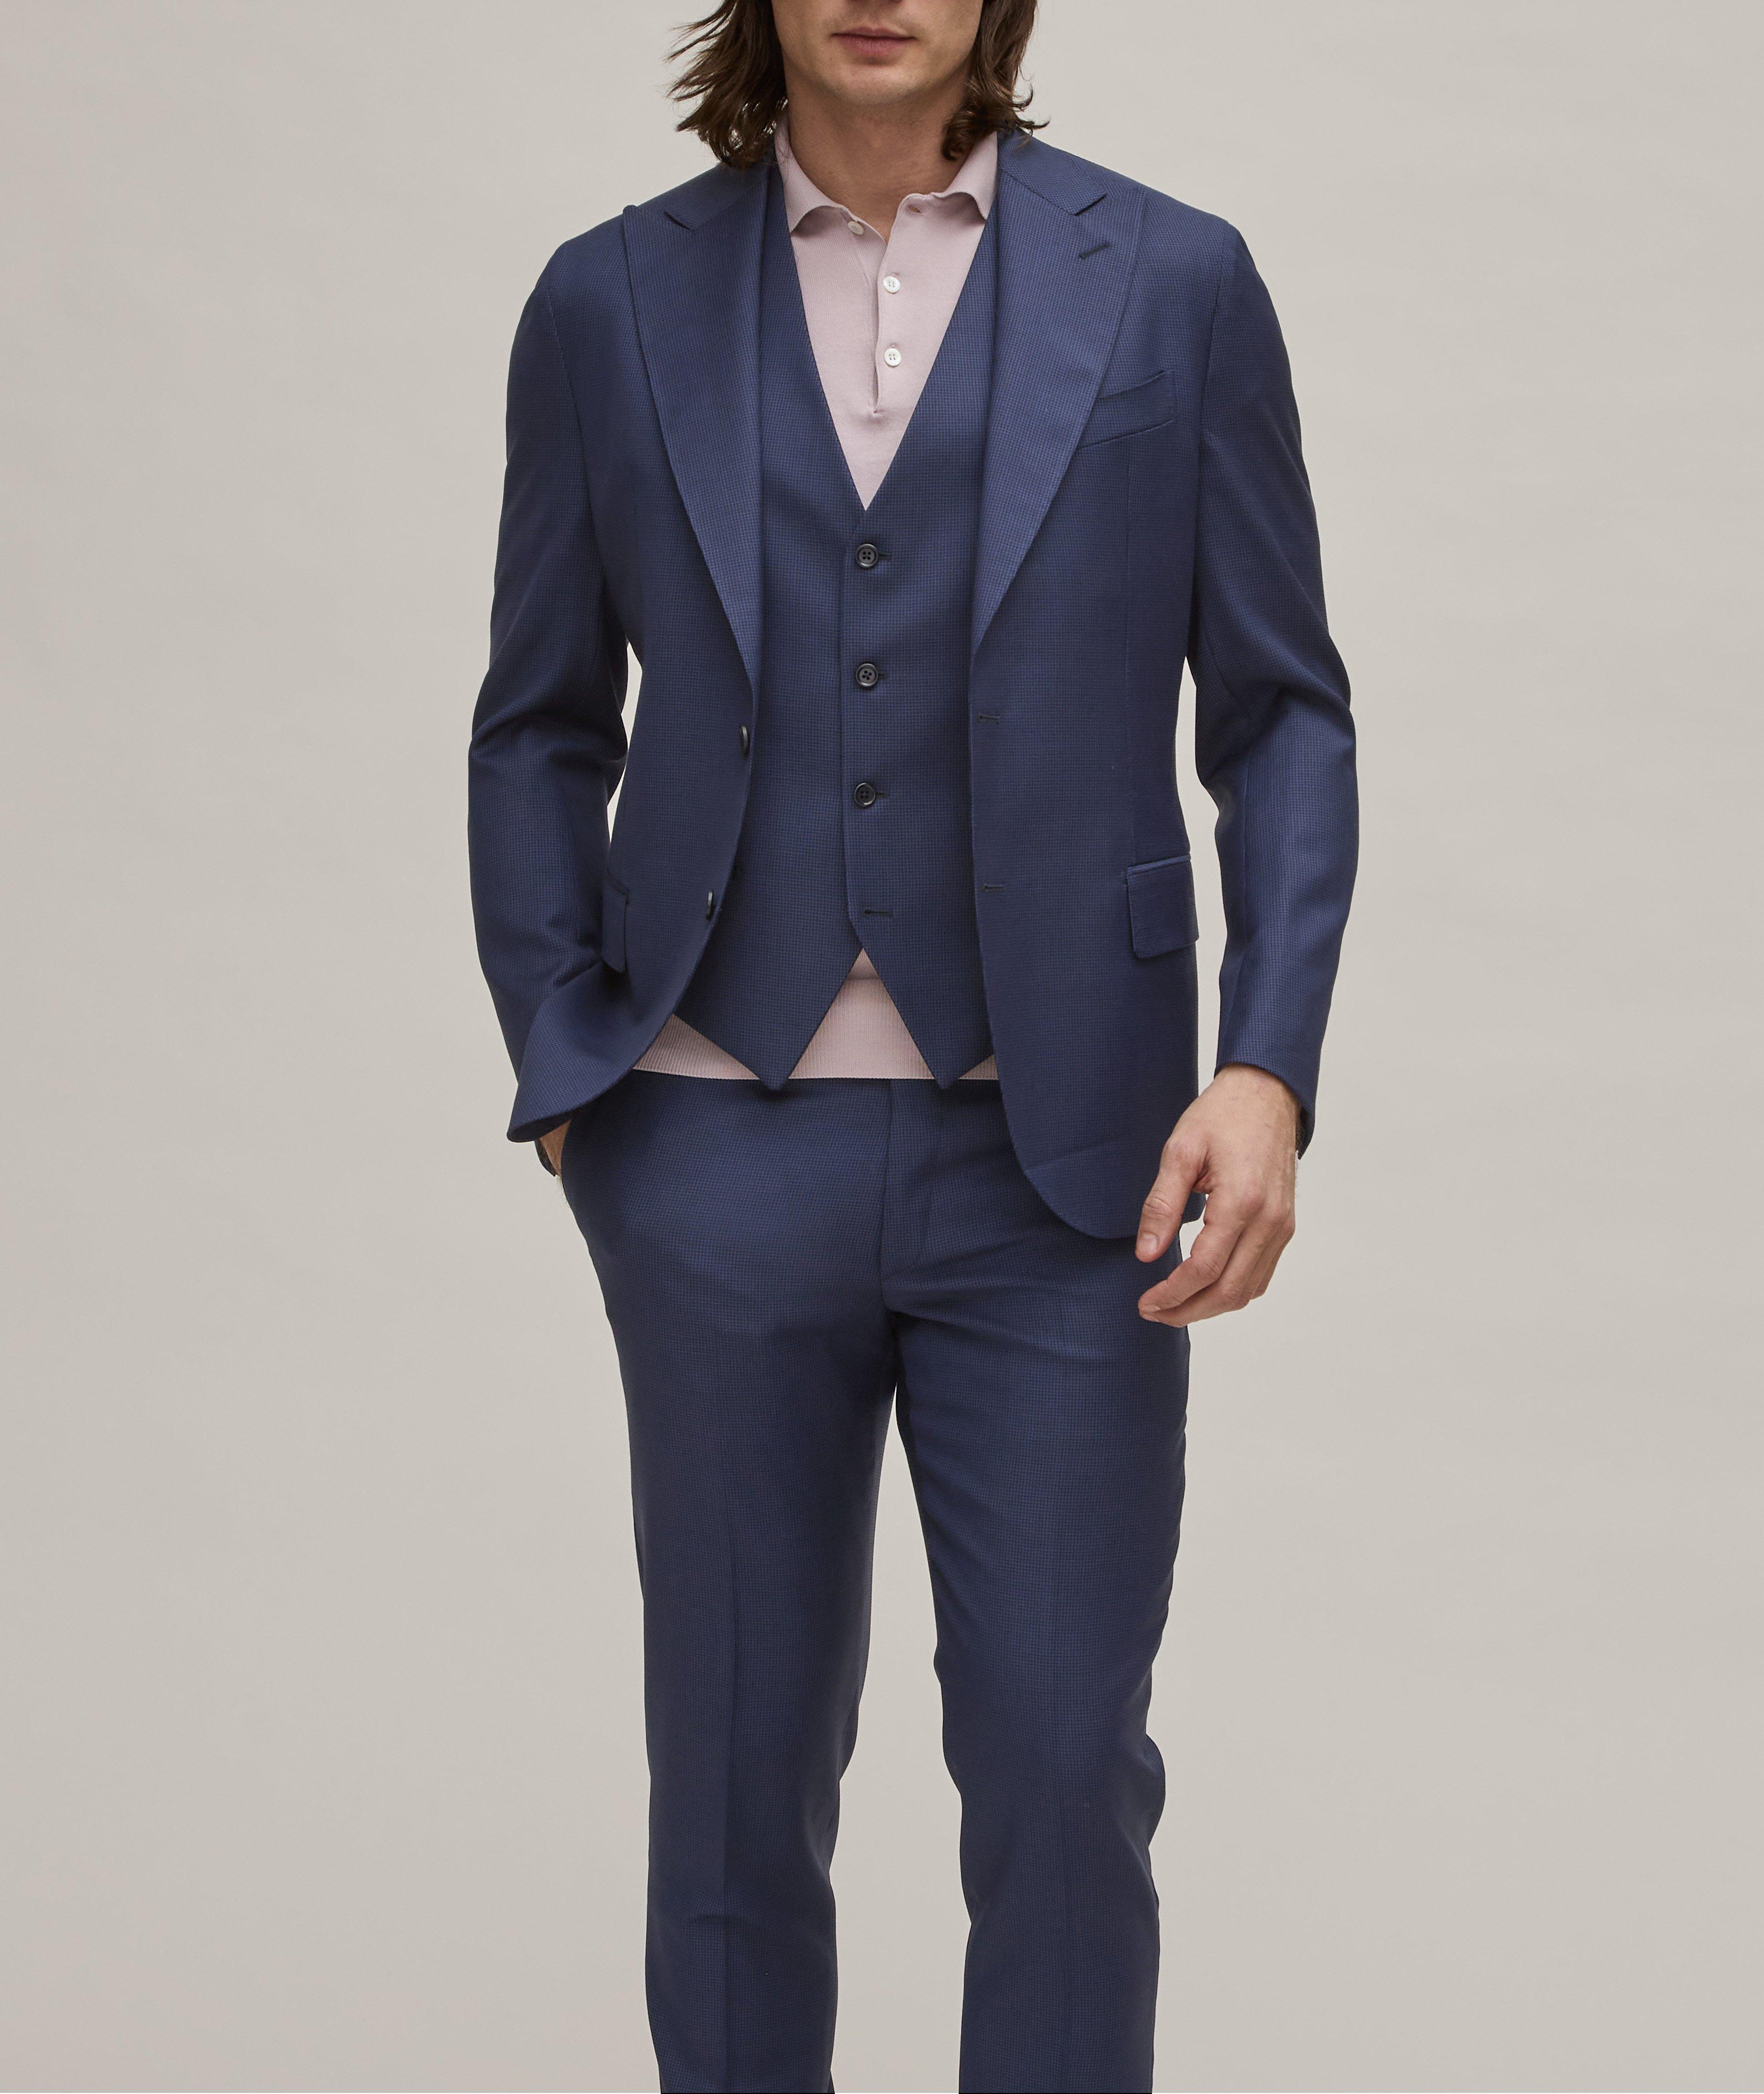 Micro-Houndstooth Drago Wool Suit image 1